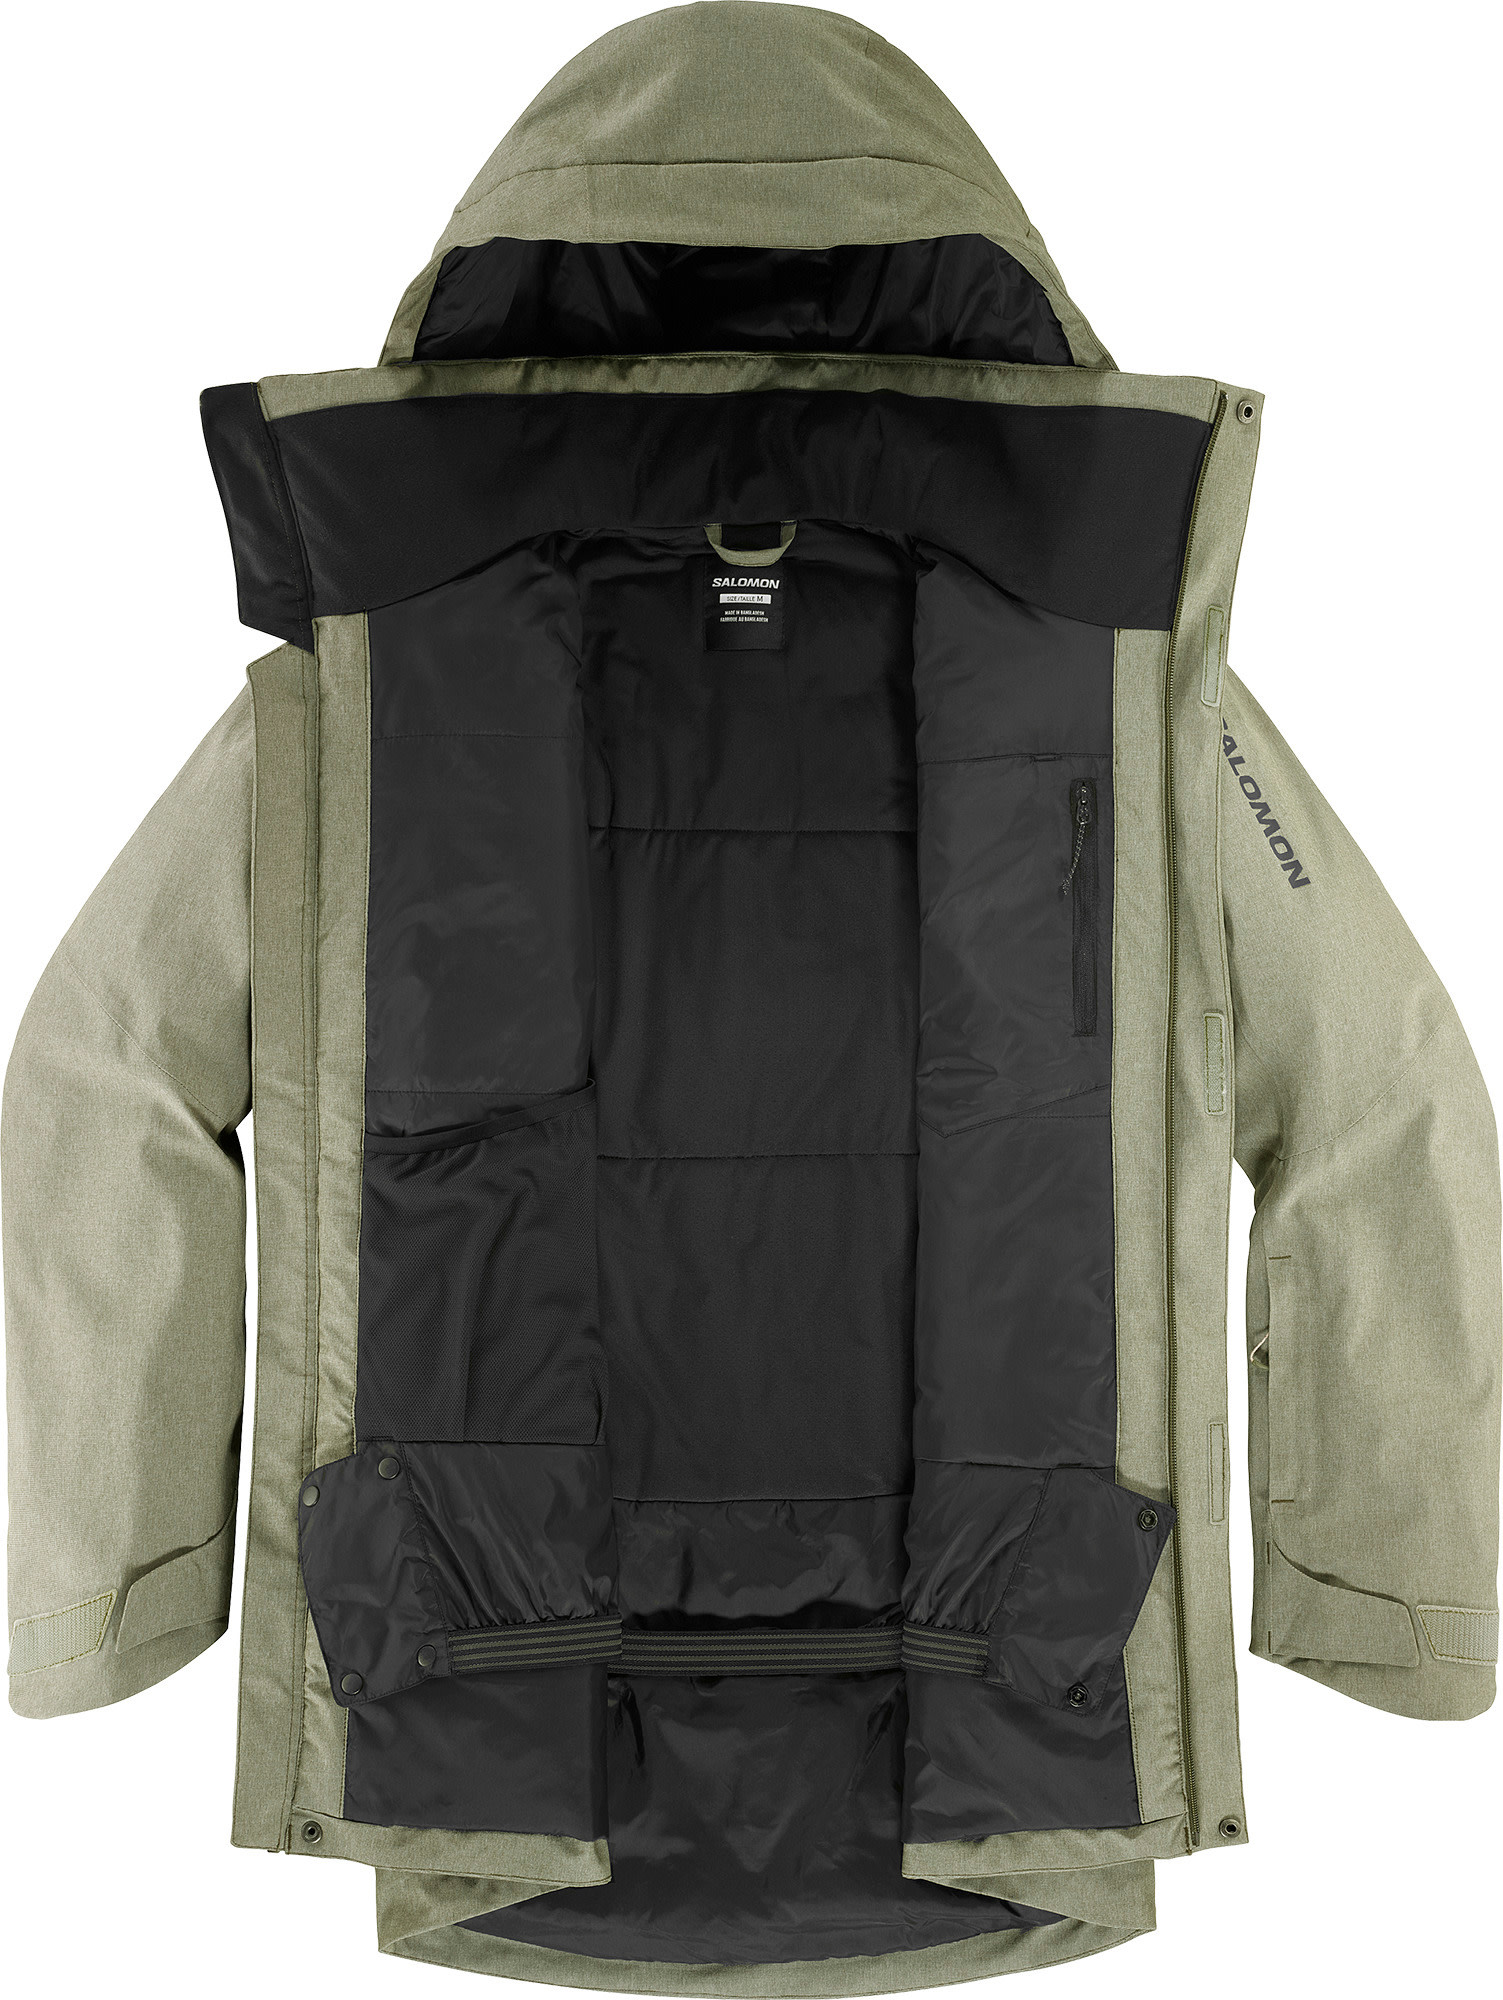 Buy Men's Stance Cargo Jacket Olive Night/Heather/ here | Outnorth